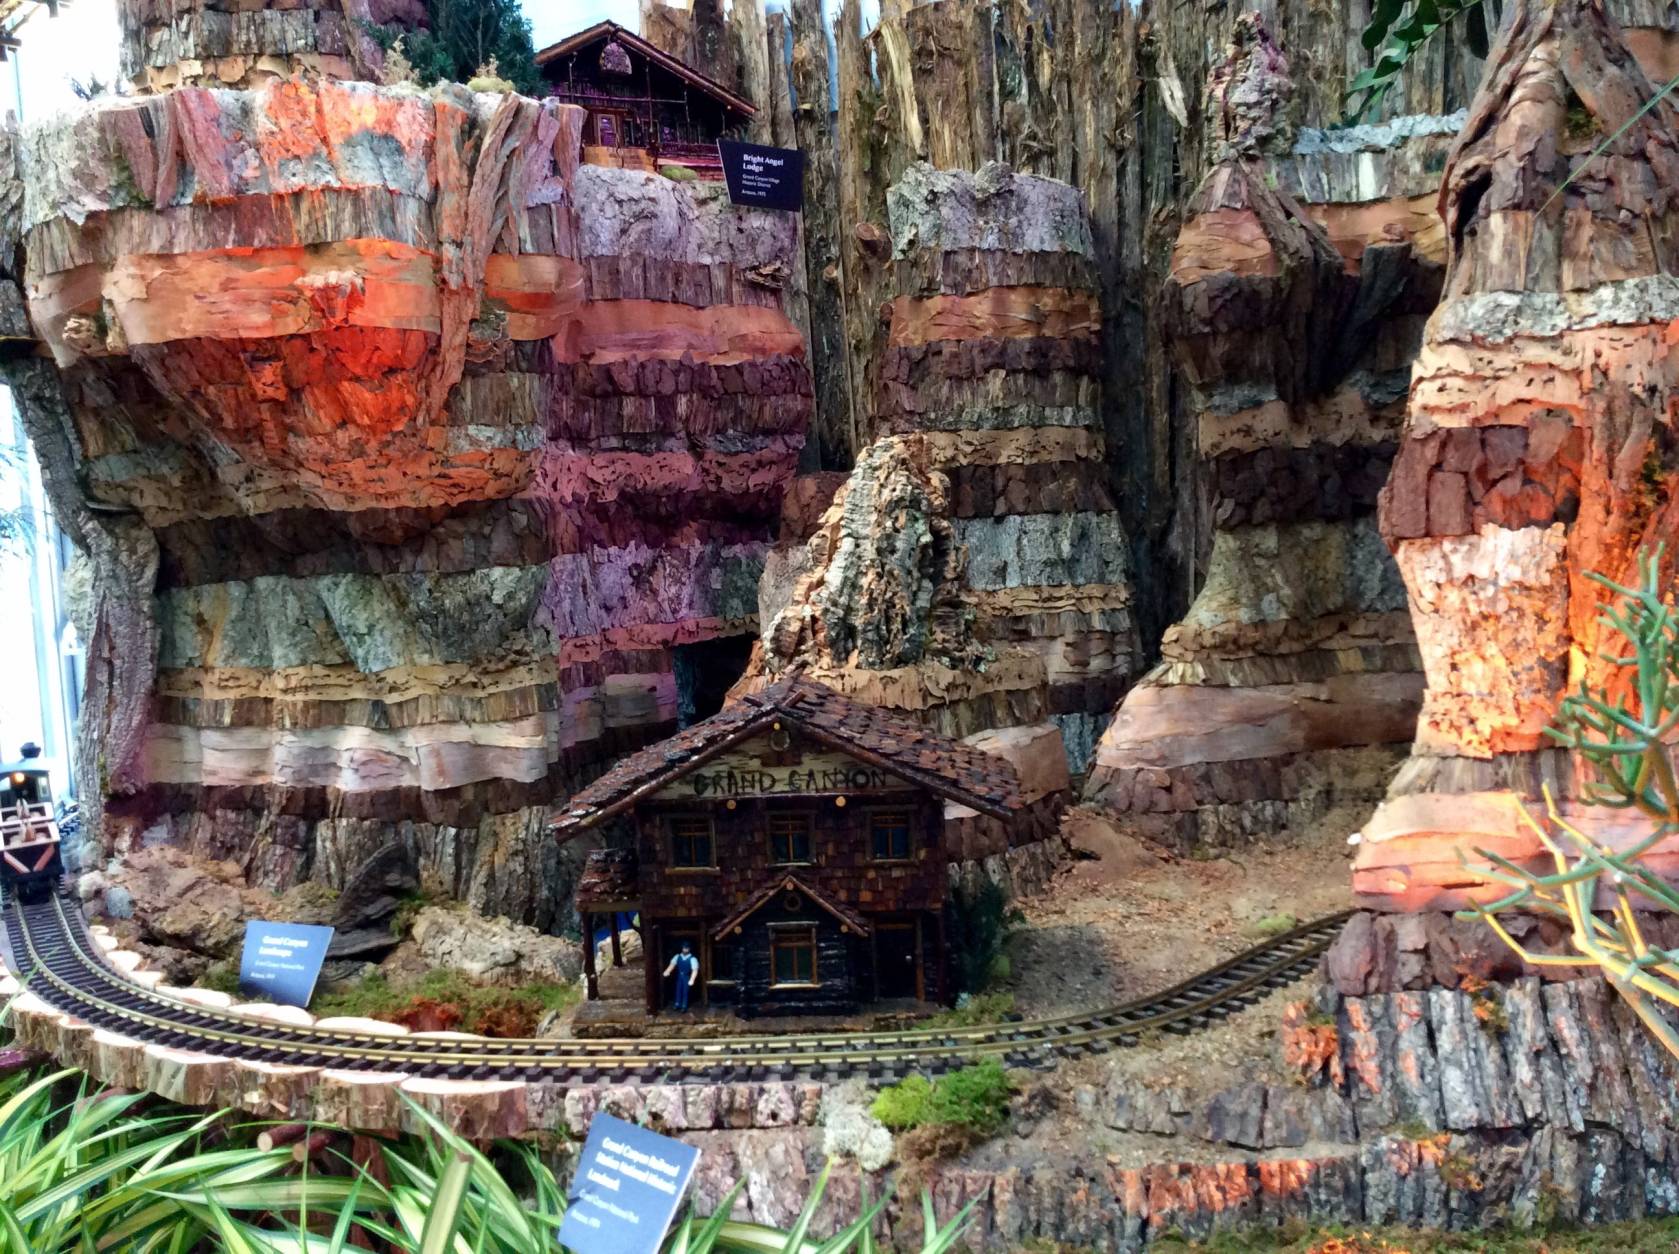 This model of the Grand Canyon was created from plants and other natural materials. (WTOP/Megan Cloherty)